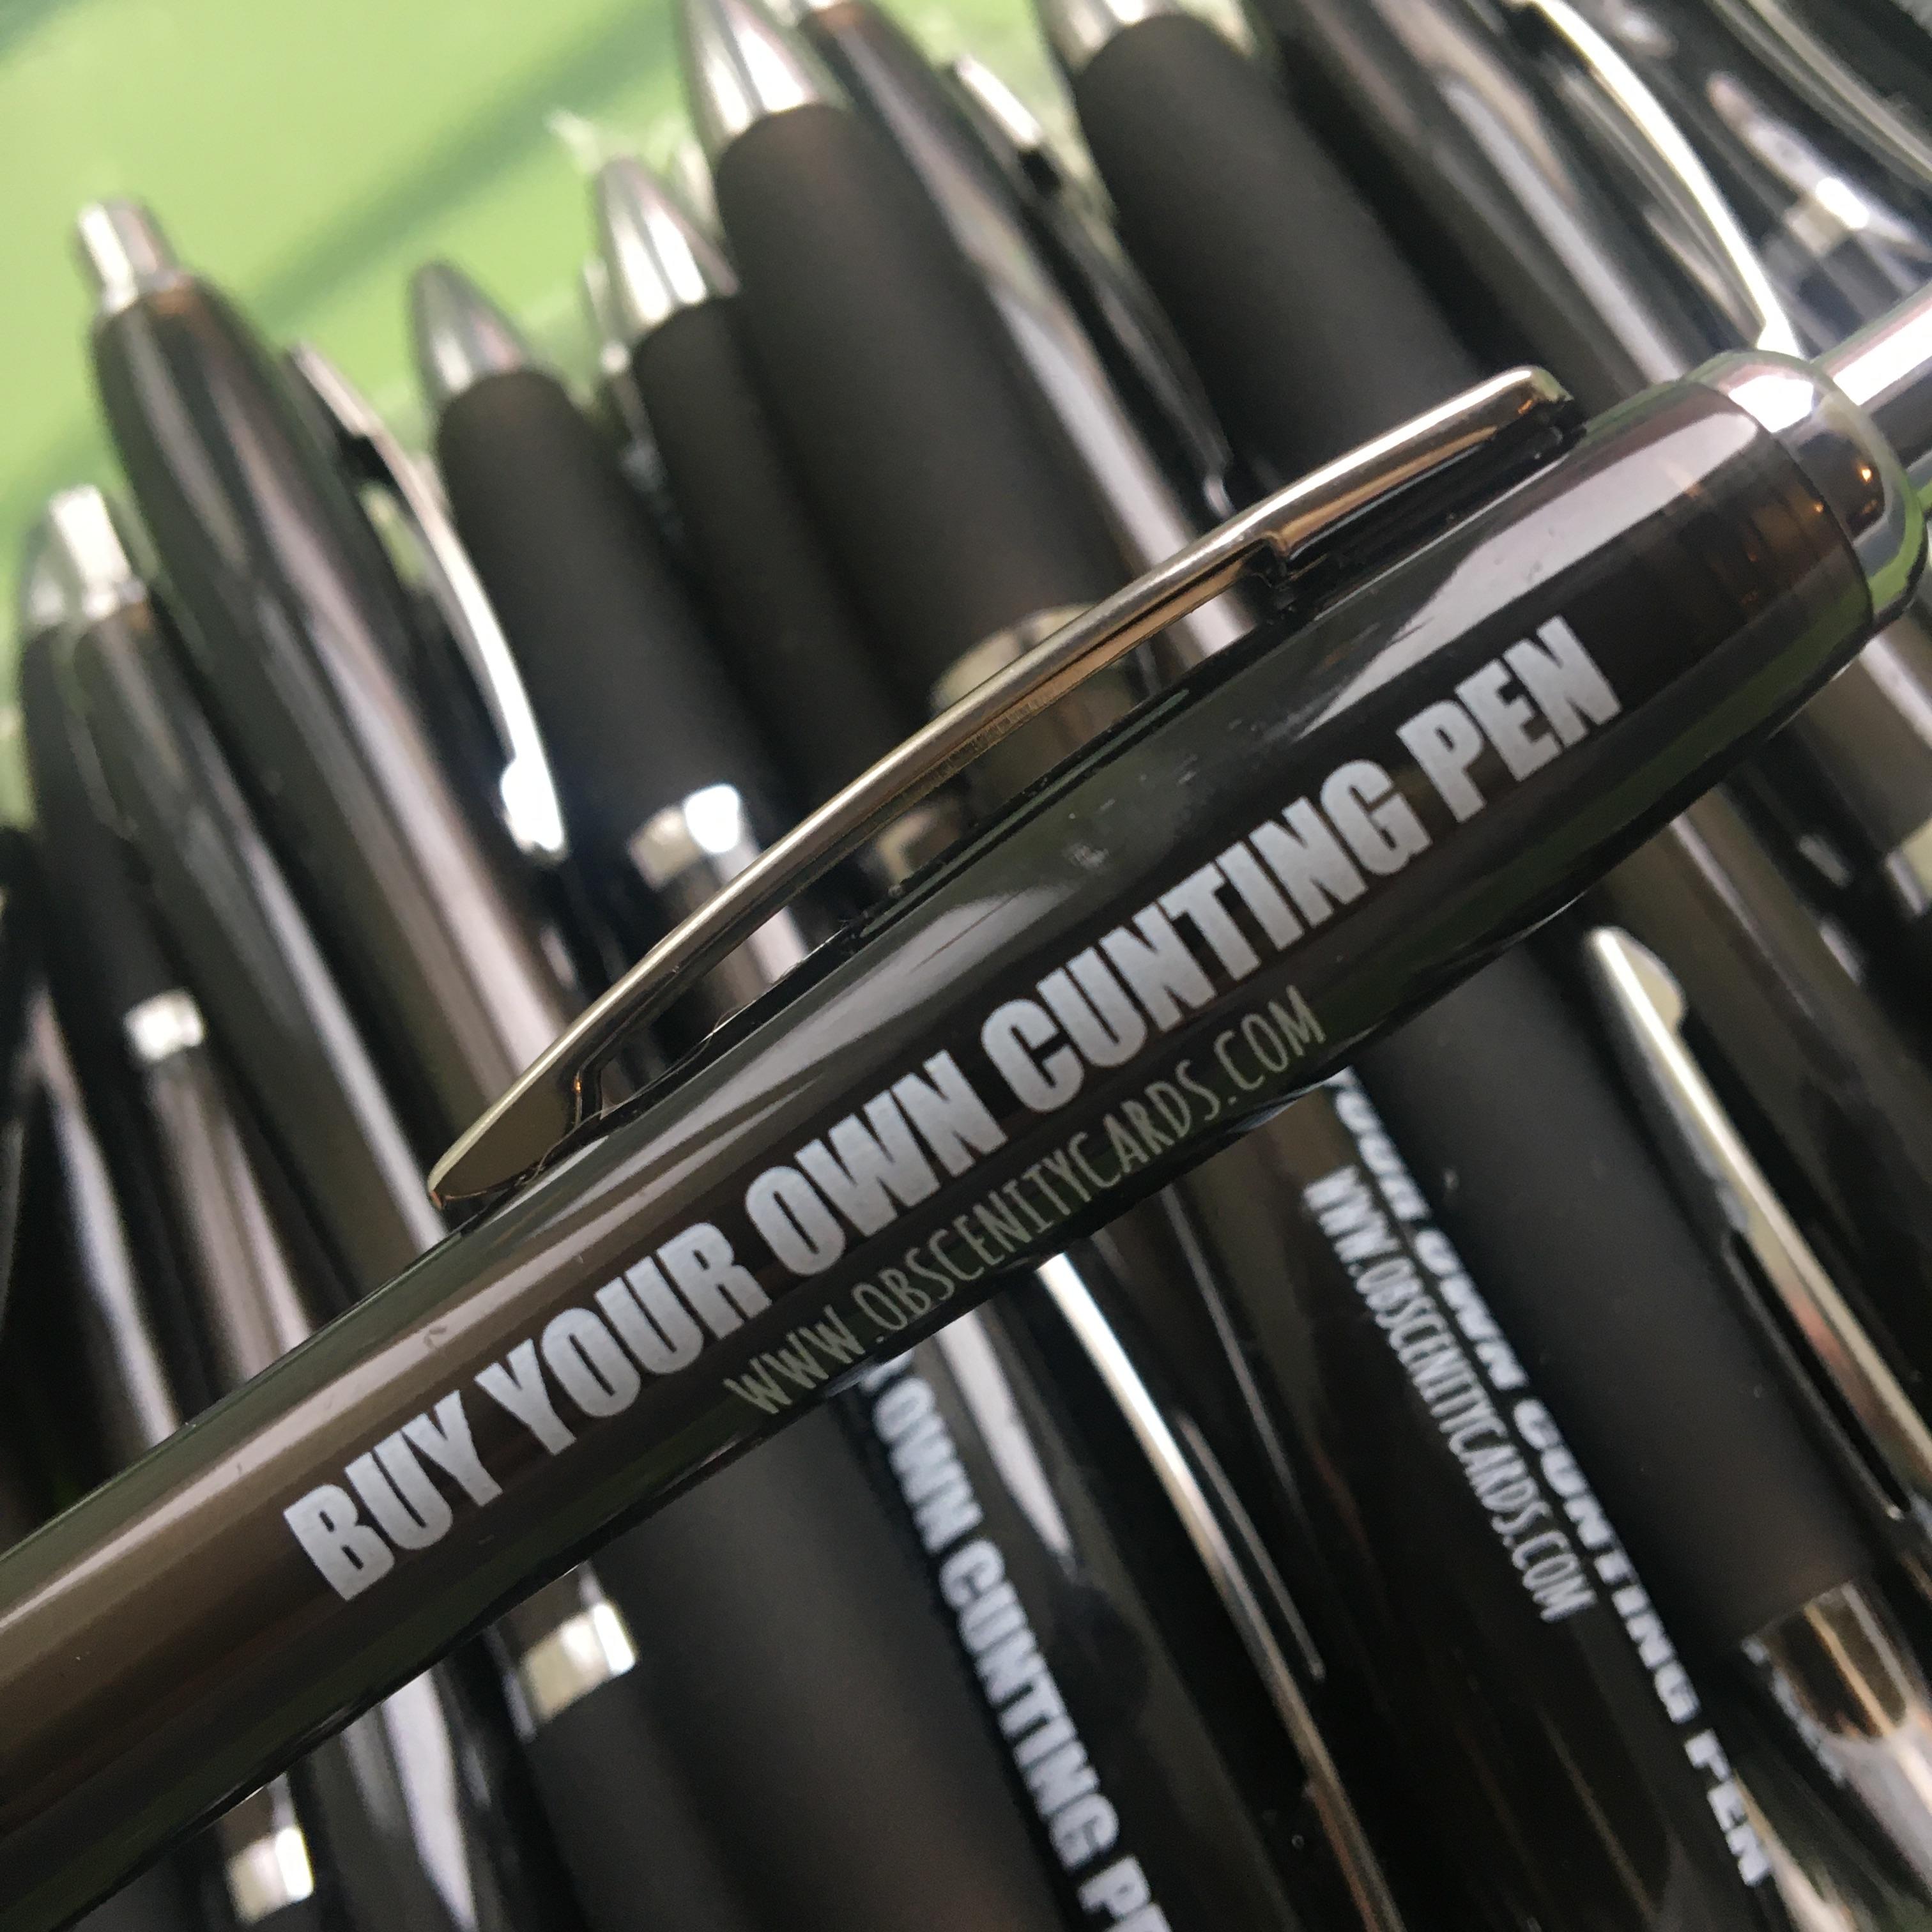 Funny Obscene Profanity Pens, buy your own cunting pen by Obscenity Cards